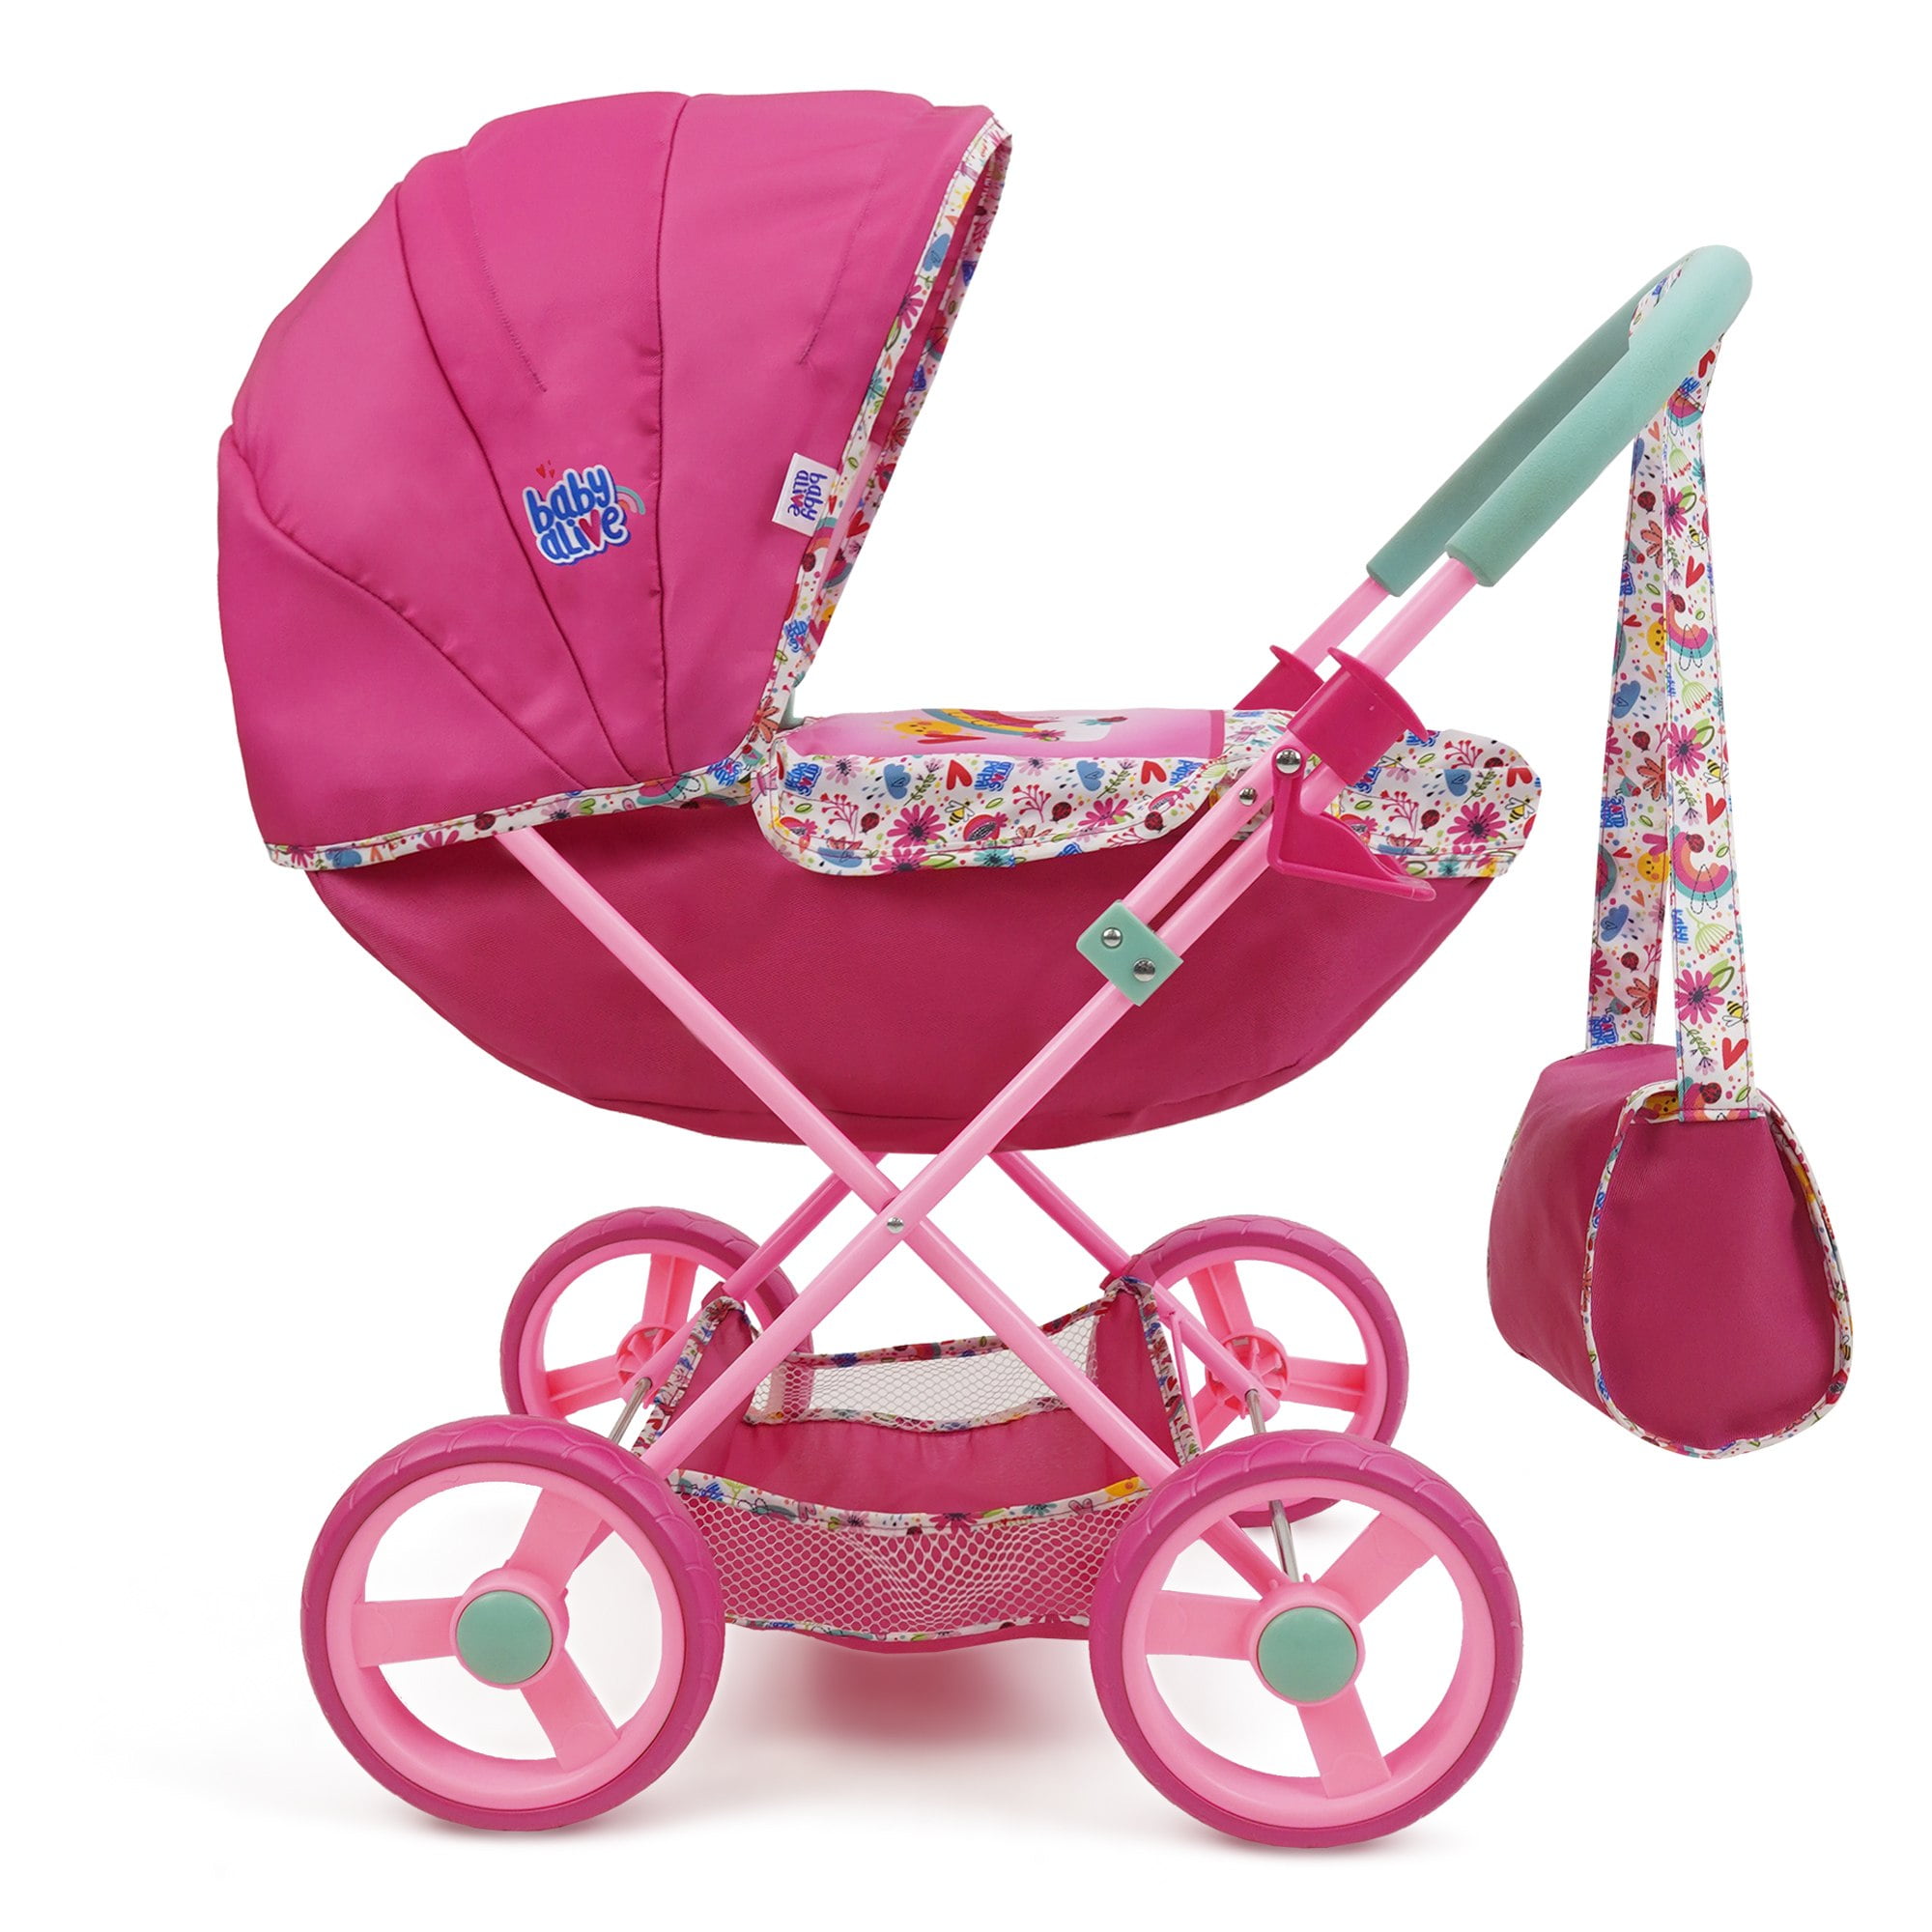 Baby Alive: Doll Stroller - Pink & Rainbow - Fits Dolls Up to 24,  Retractable Canopy, Safety Harness for Baby Doll, Two-Toned Handle &  Wheels